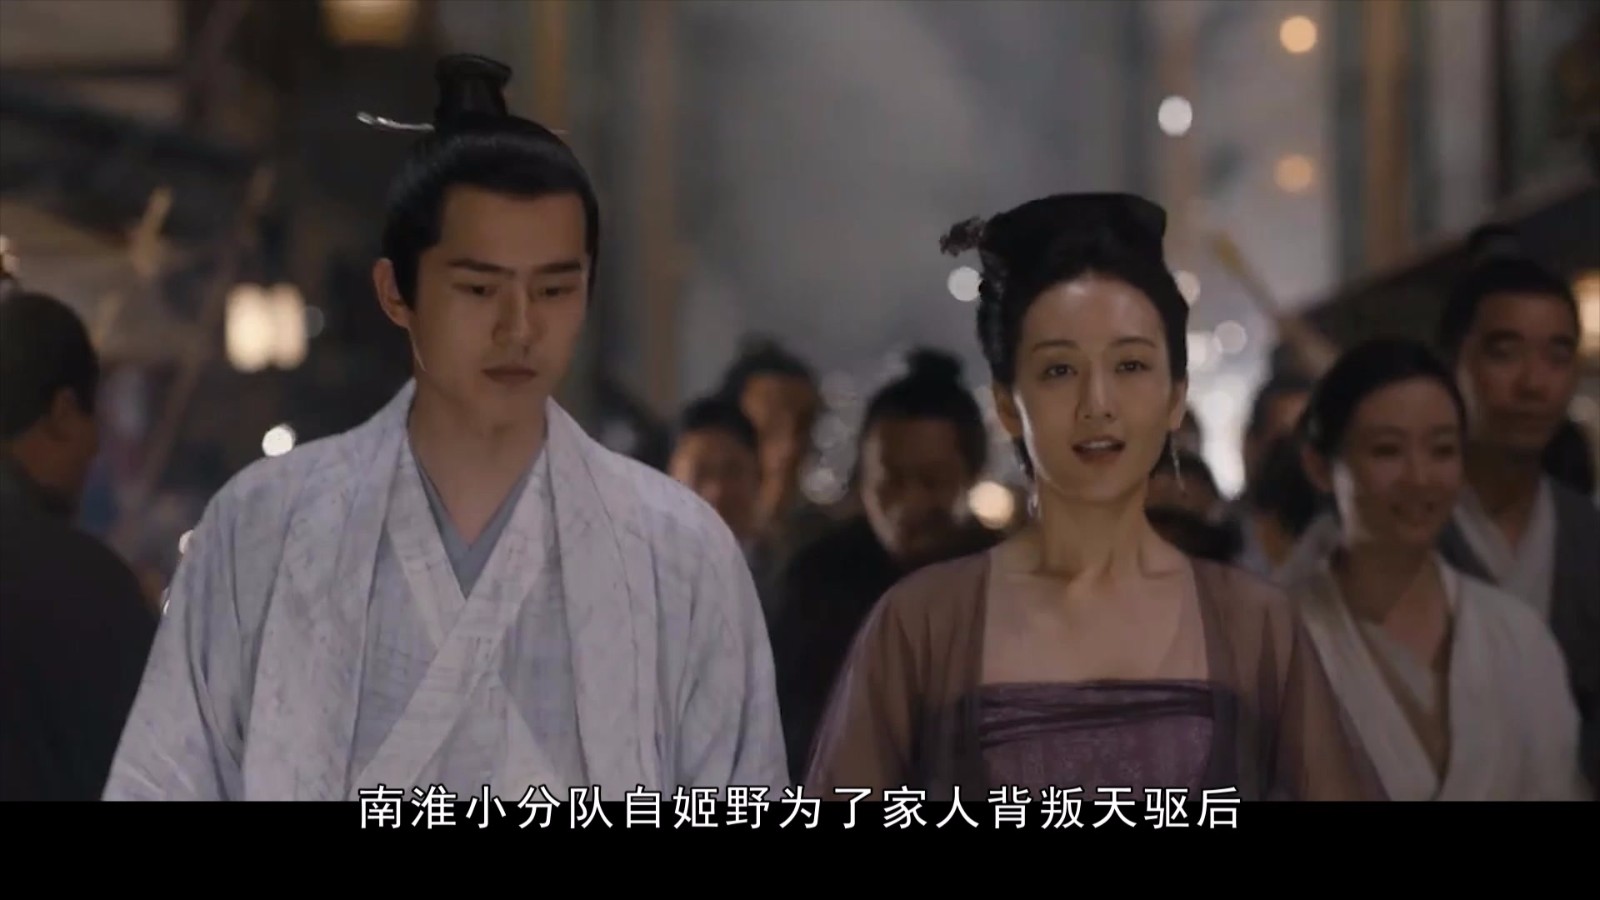 Jiuzhou Fanlu: Jiye has changed his mind. The mistake lies not only in Lu Guidun and Yu Ran, but also in missing or missing.